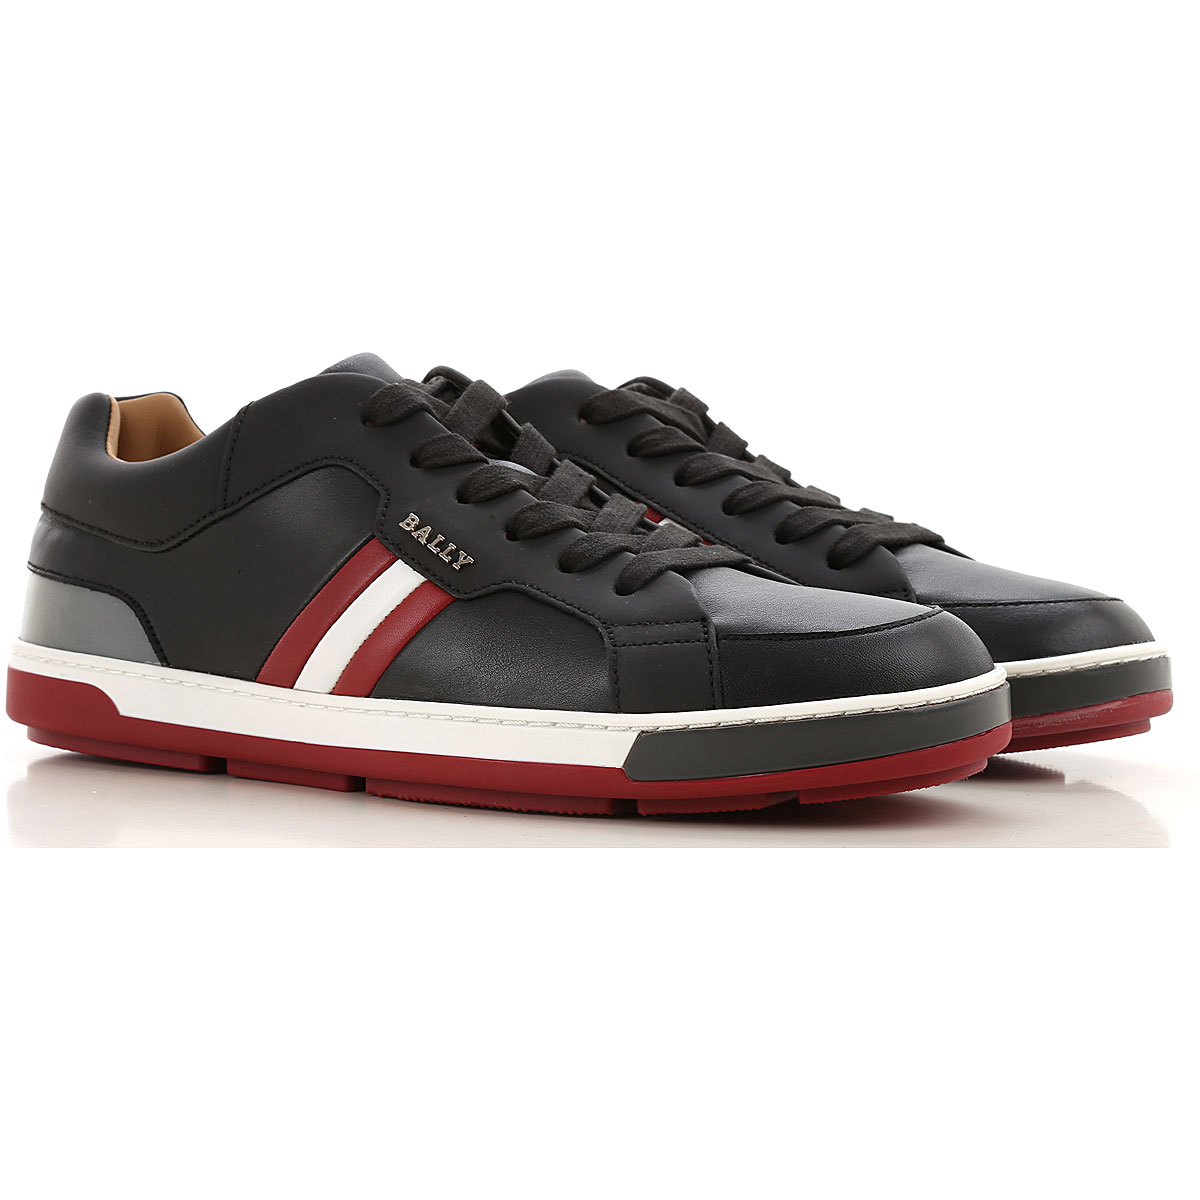 Mens Shoes Bally, Style code: airone-120-